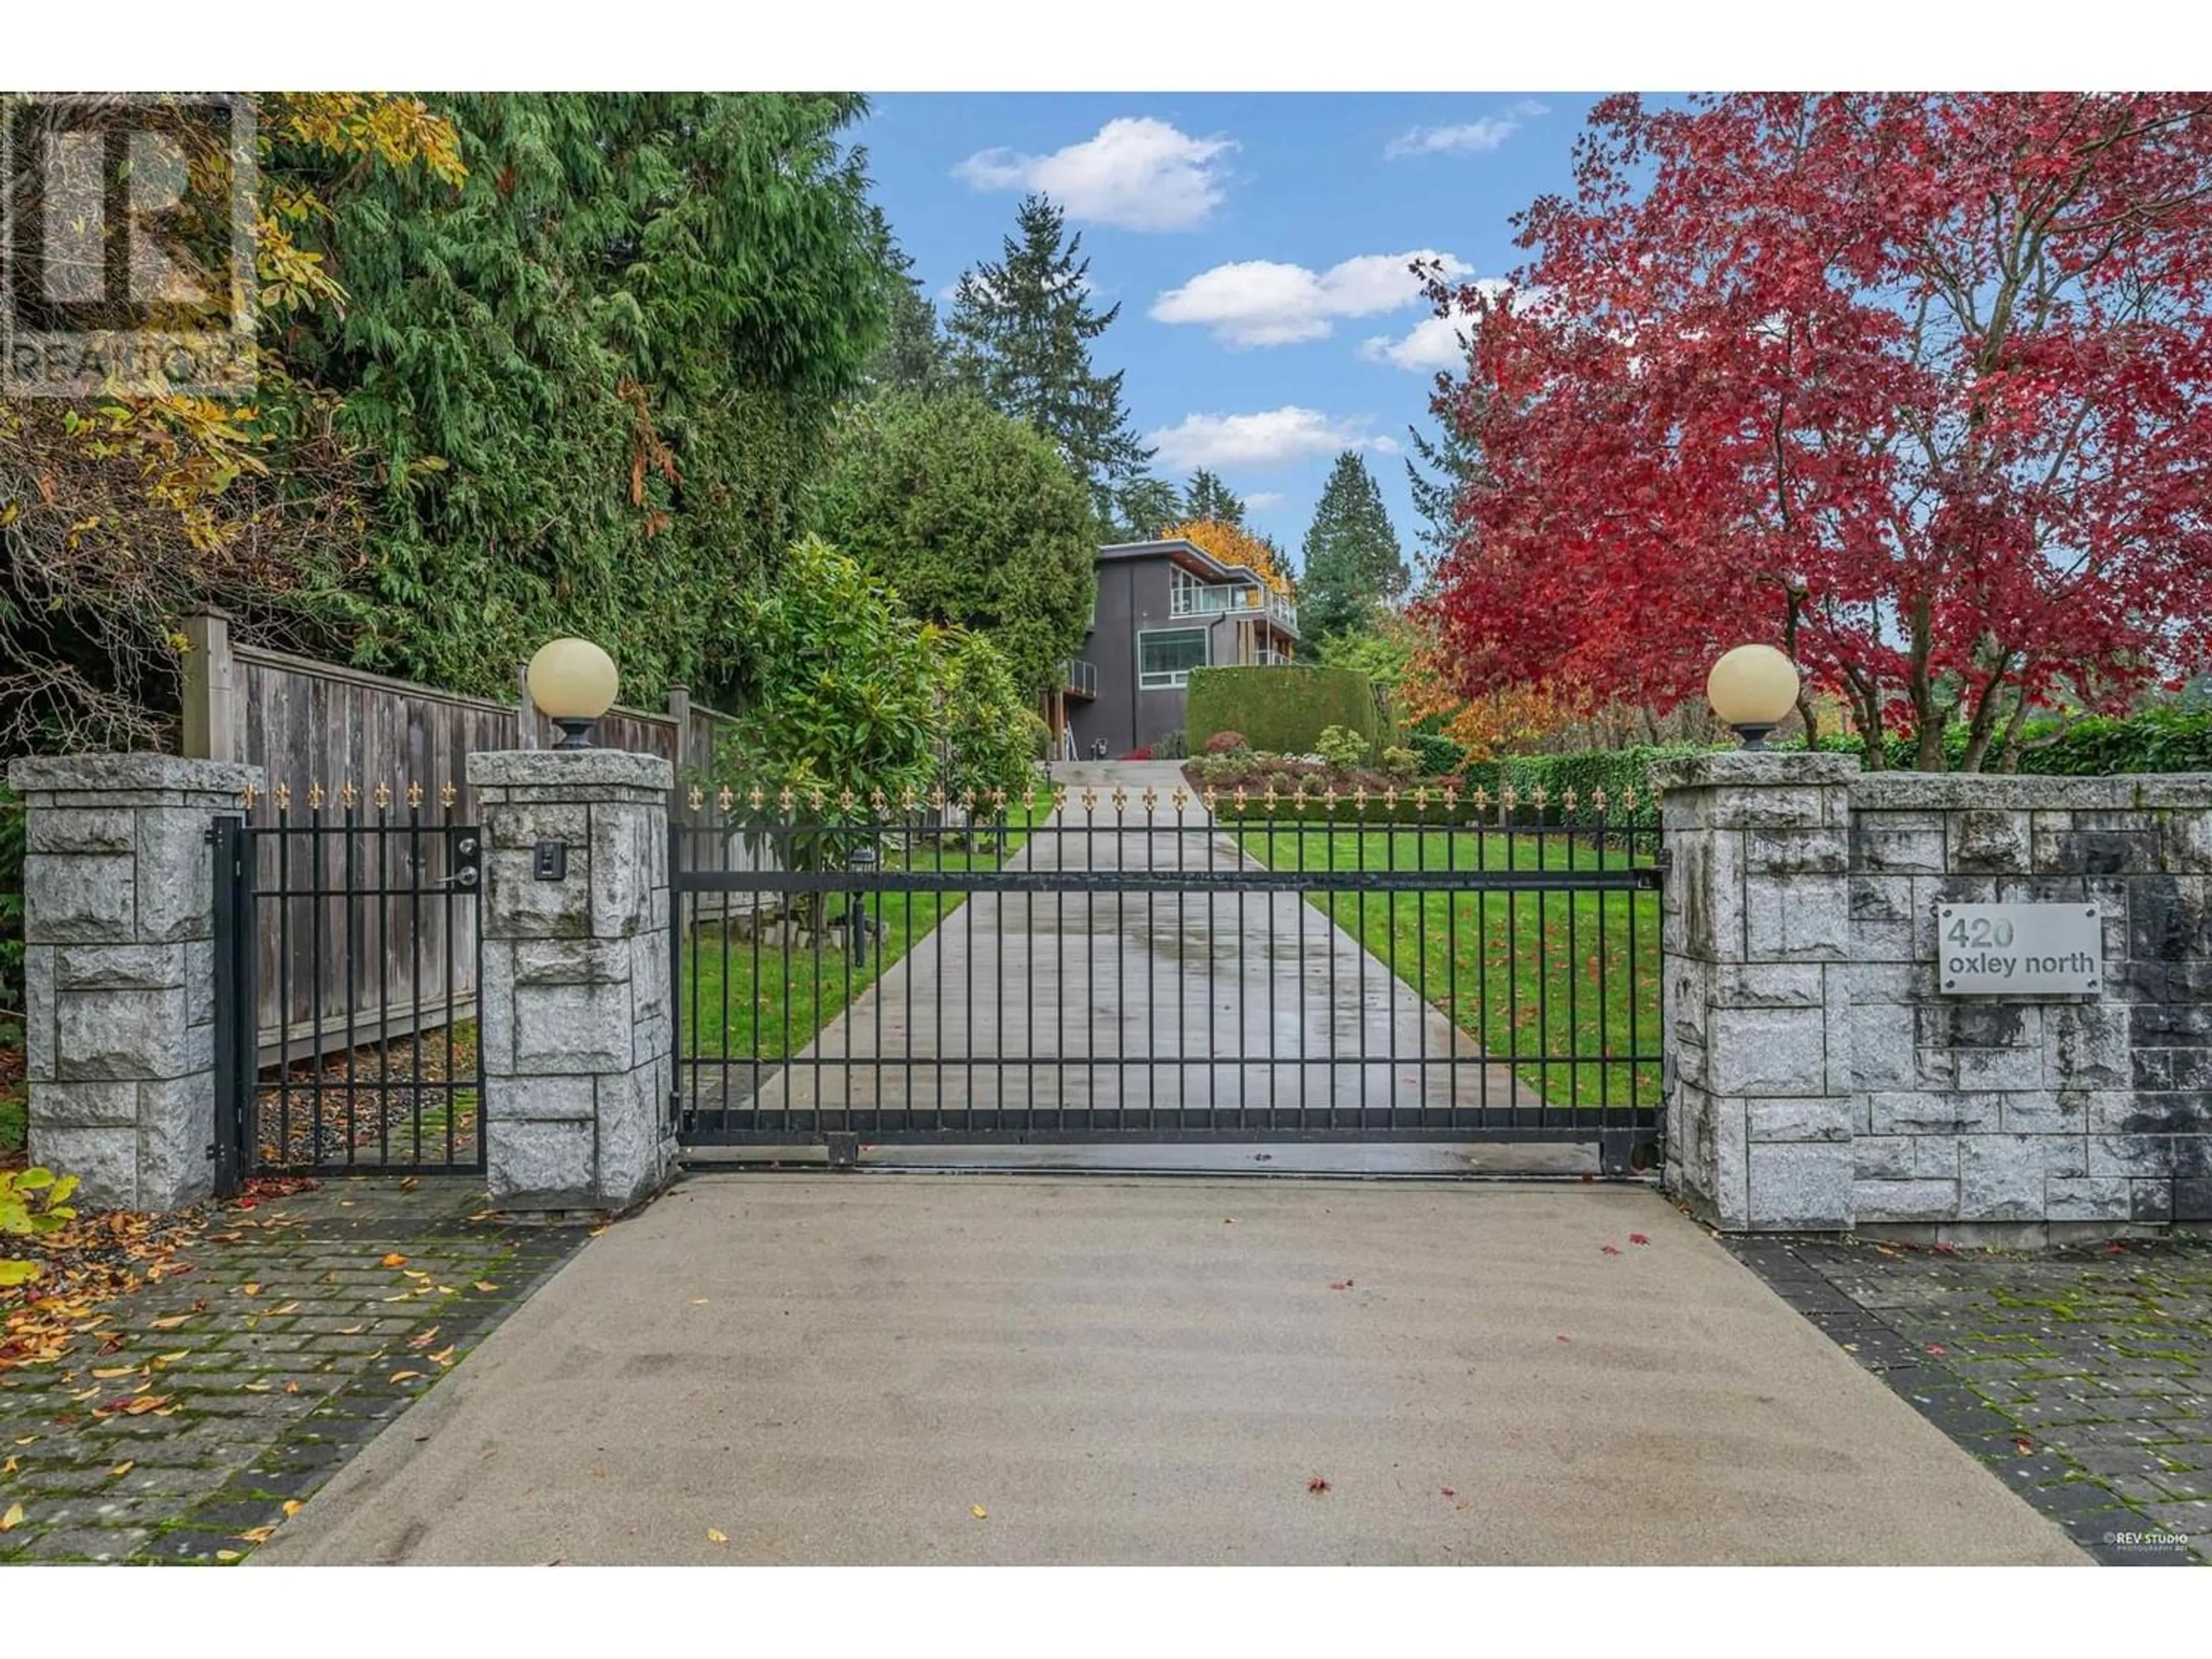 Fenced yard for 420 N OXLEY STREET, West Vancouver British Columbia V7V2L6